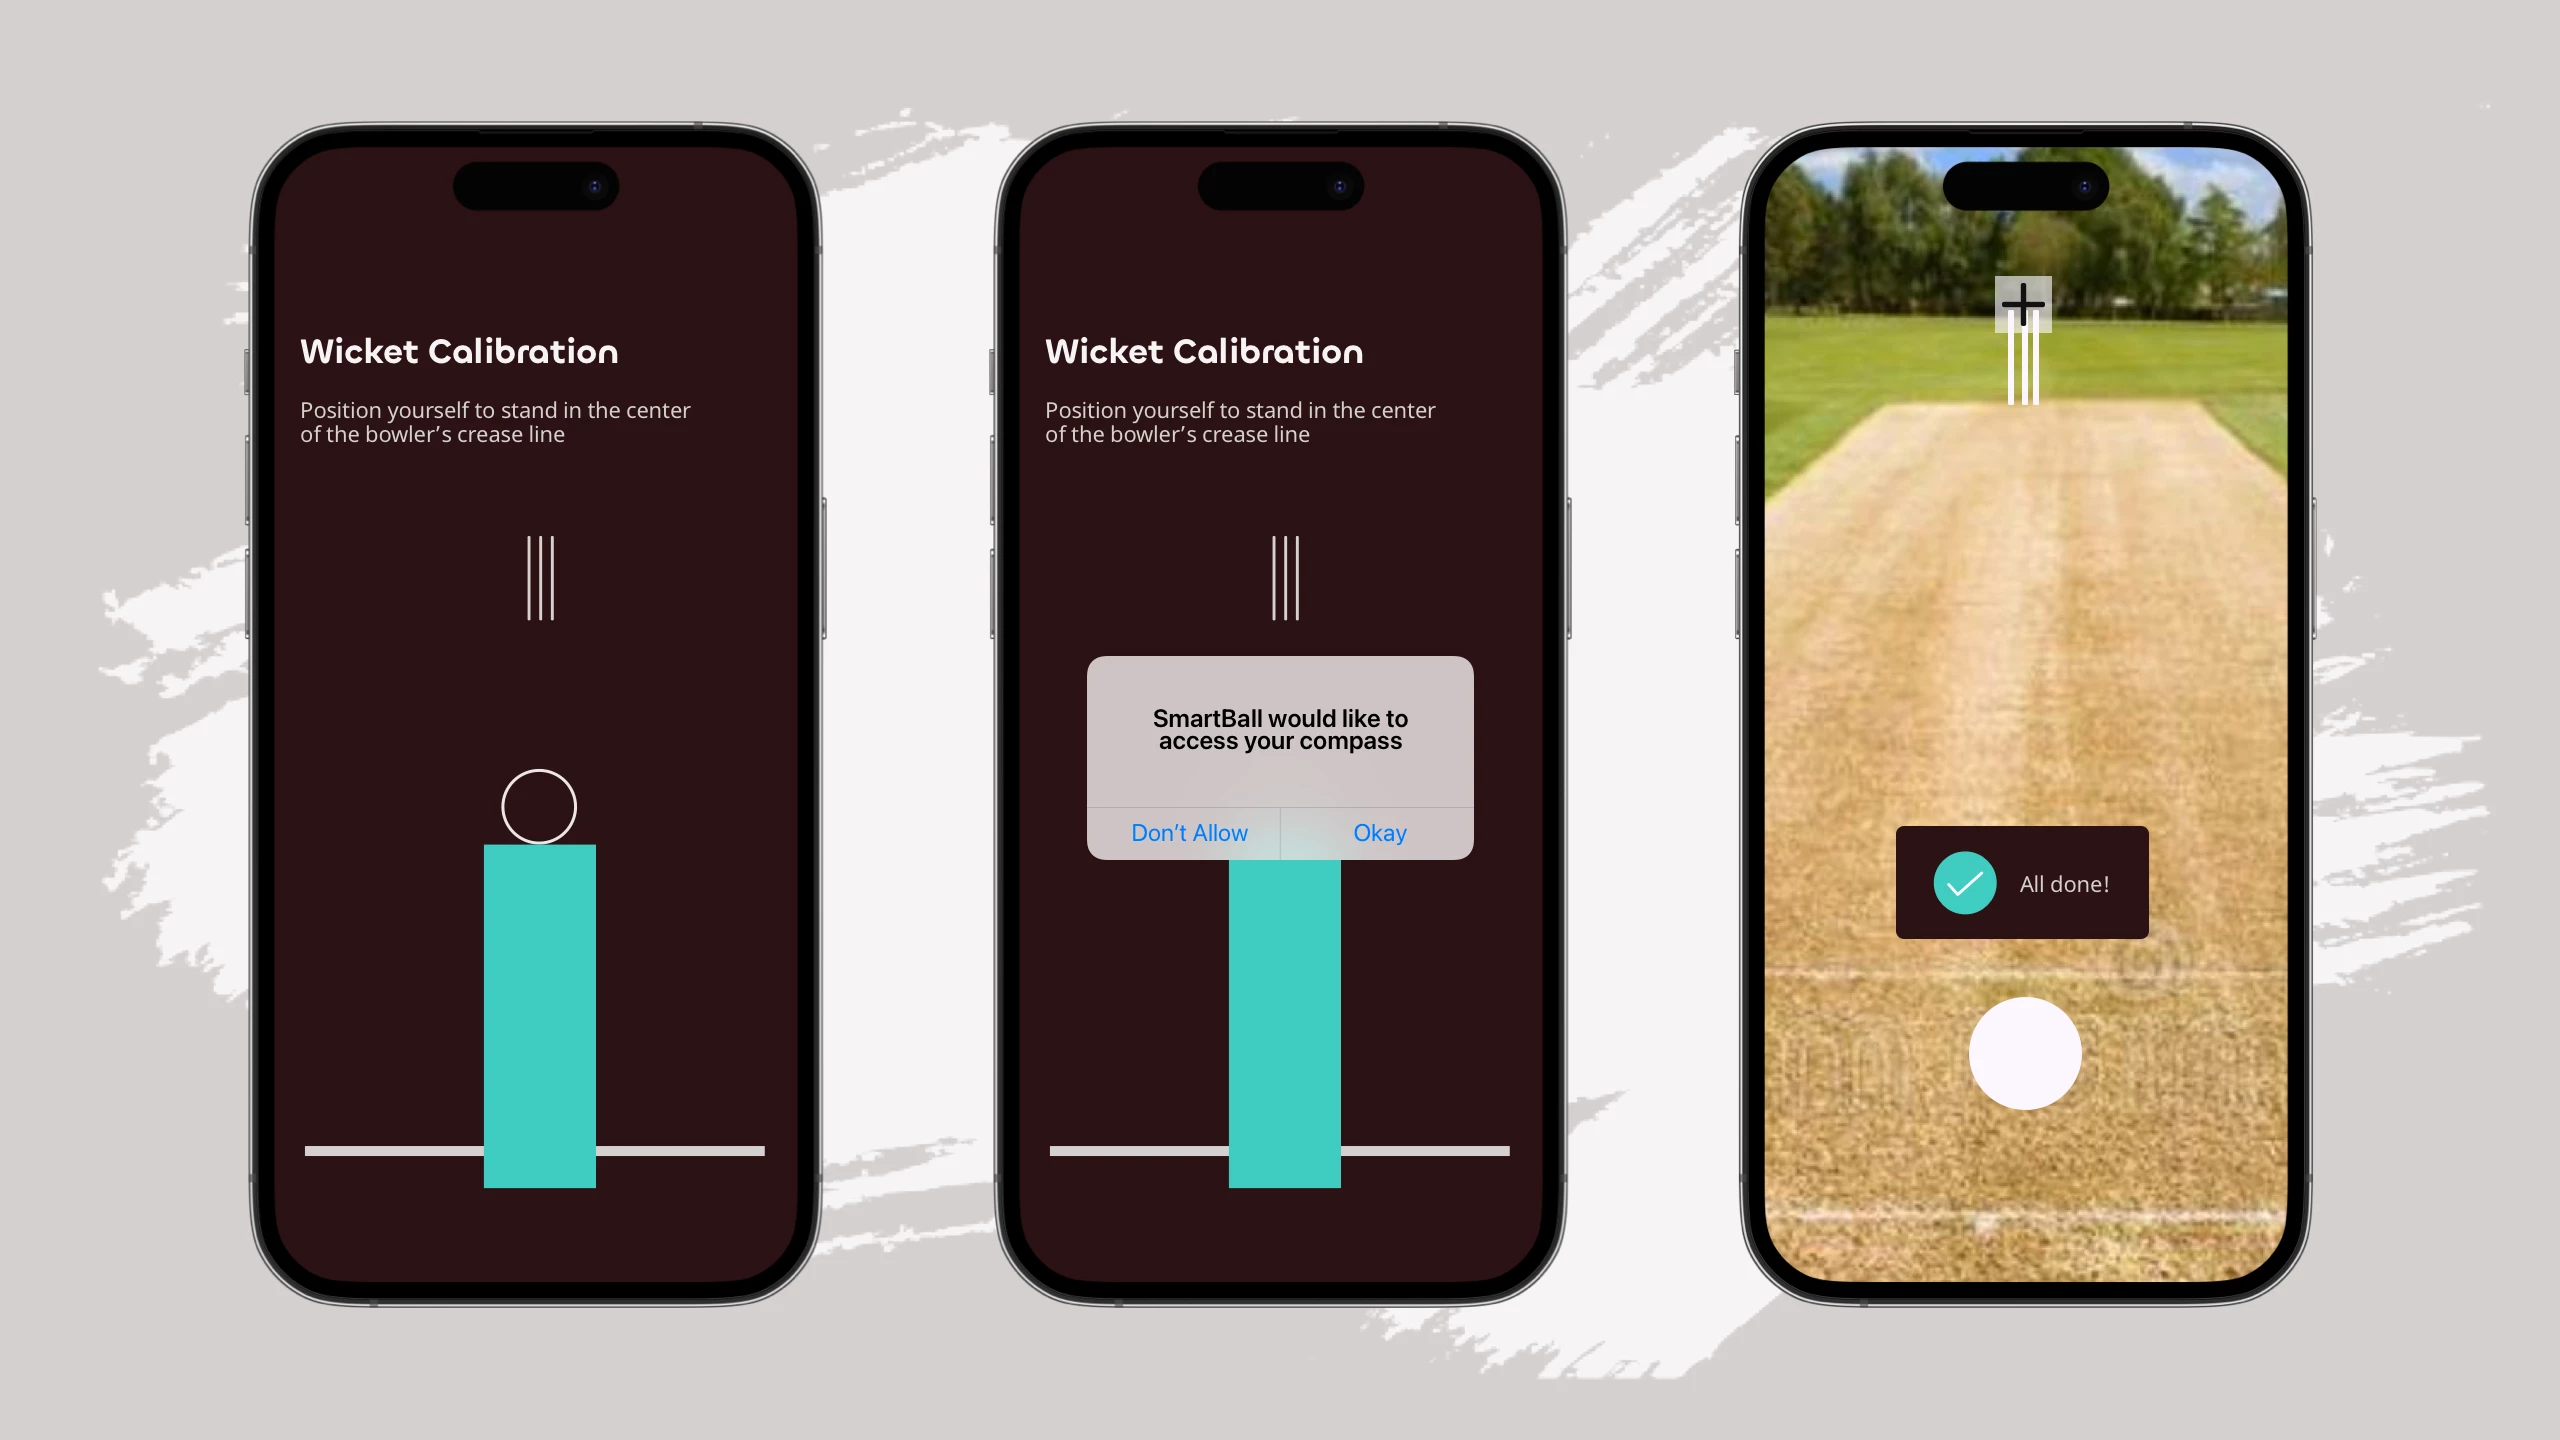 Screens from The Batting Labs app, showing the wicket calibration process